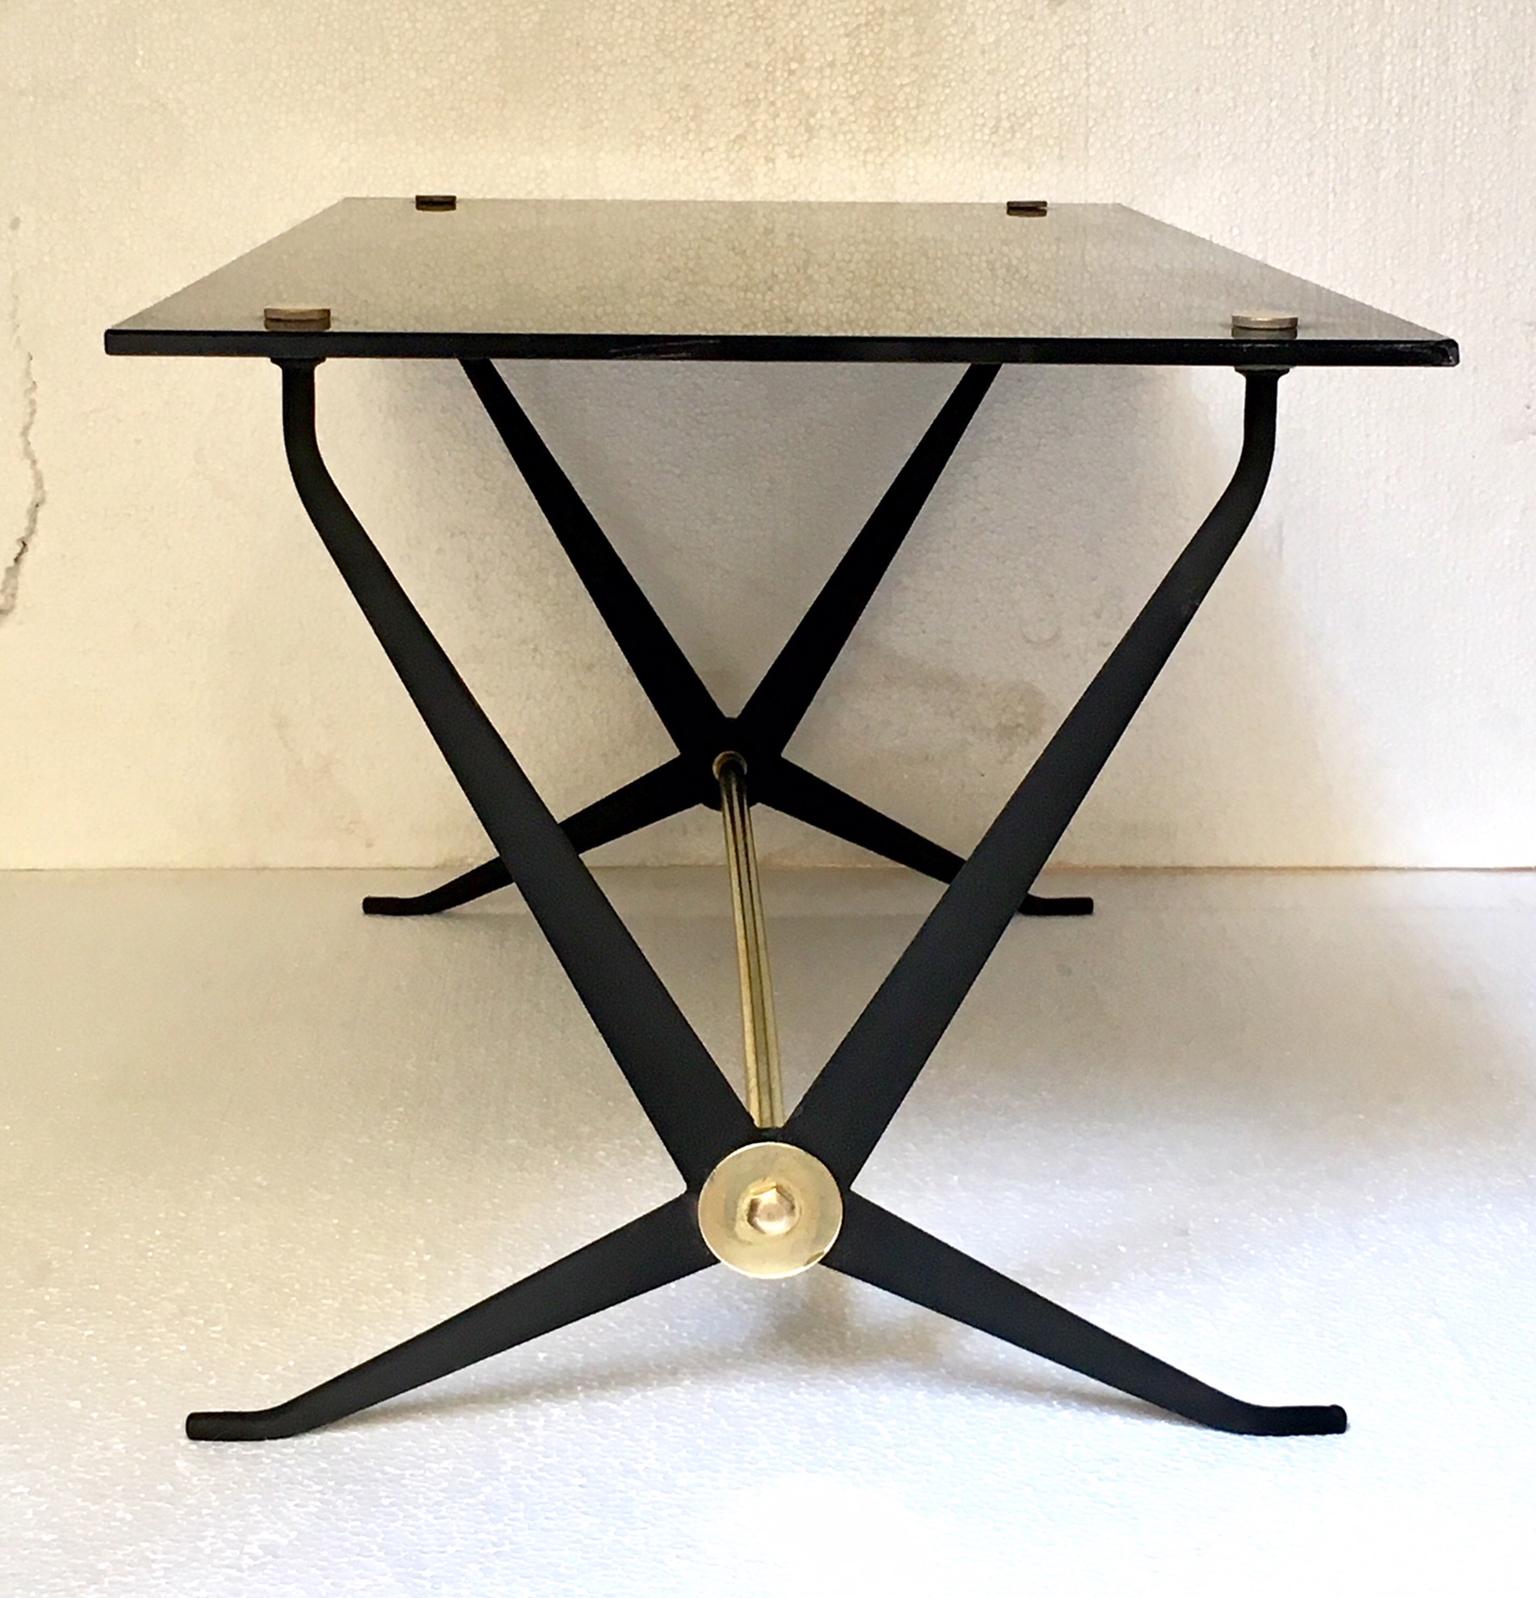 Angelo Ostuni Midcentury Brass and Black Opaline Glass Italian Coffee Table 1950

Italian coffee or end table designed by Angelo Ostuni., made in brass and black painted metal, the to is black opaline glass